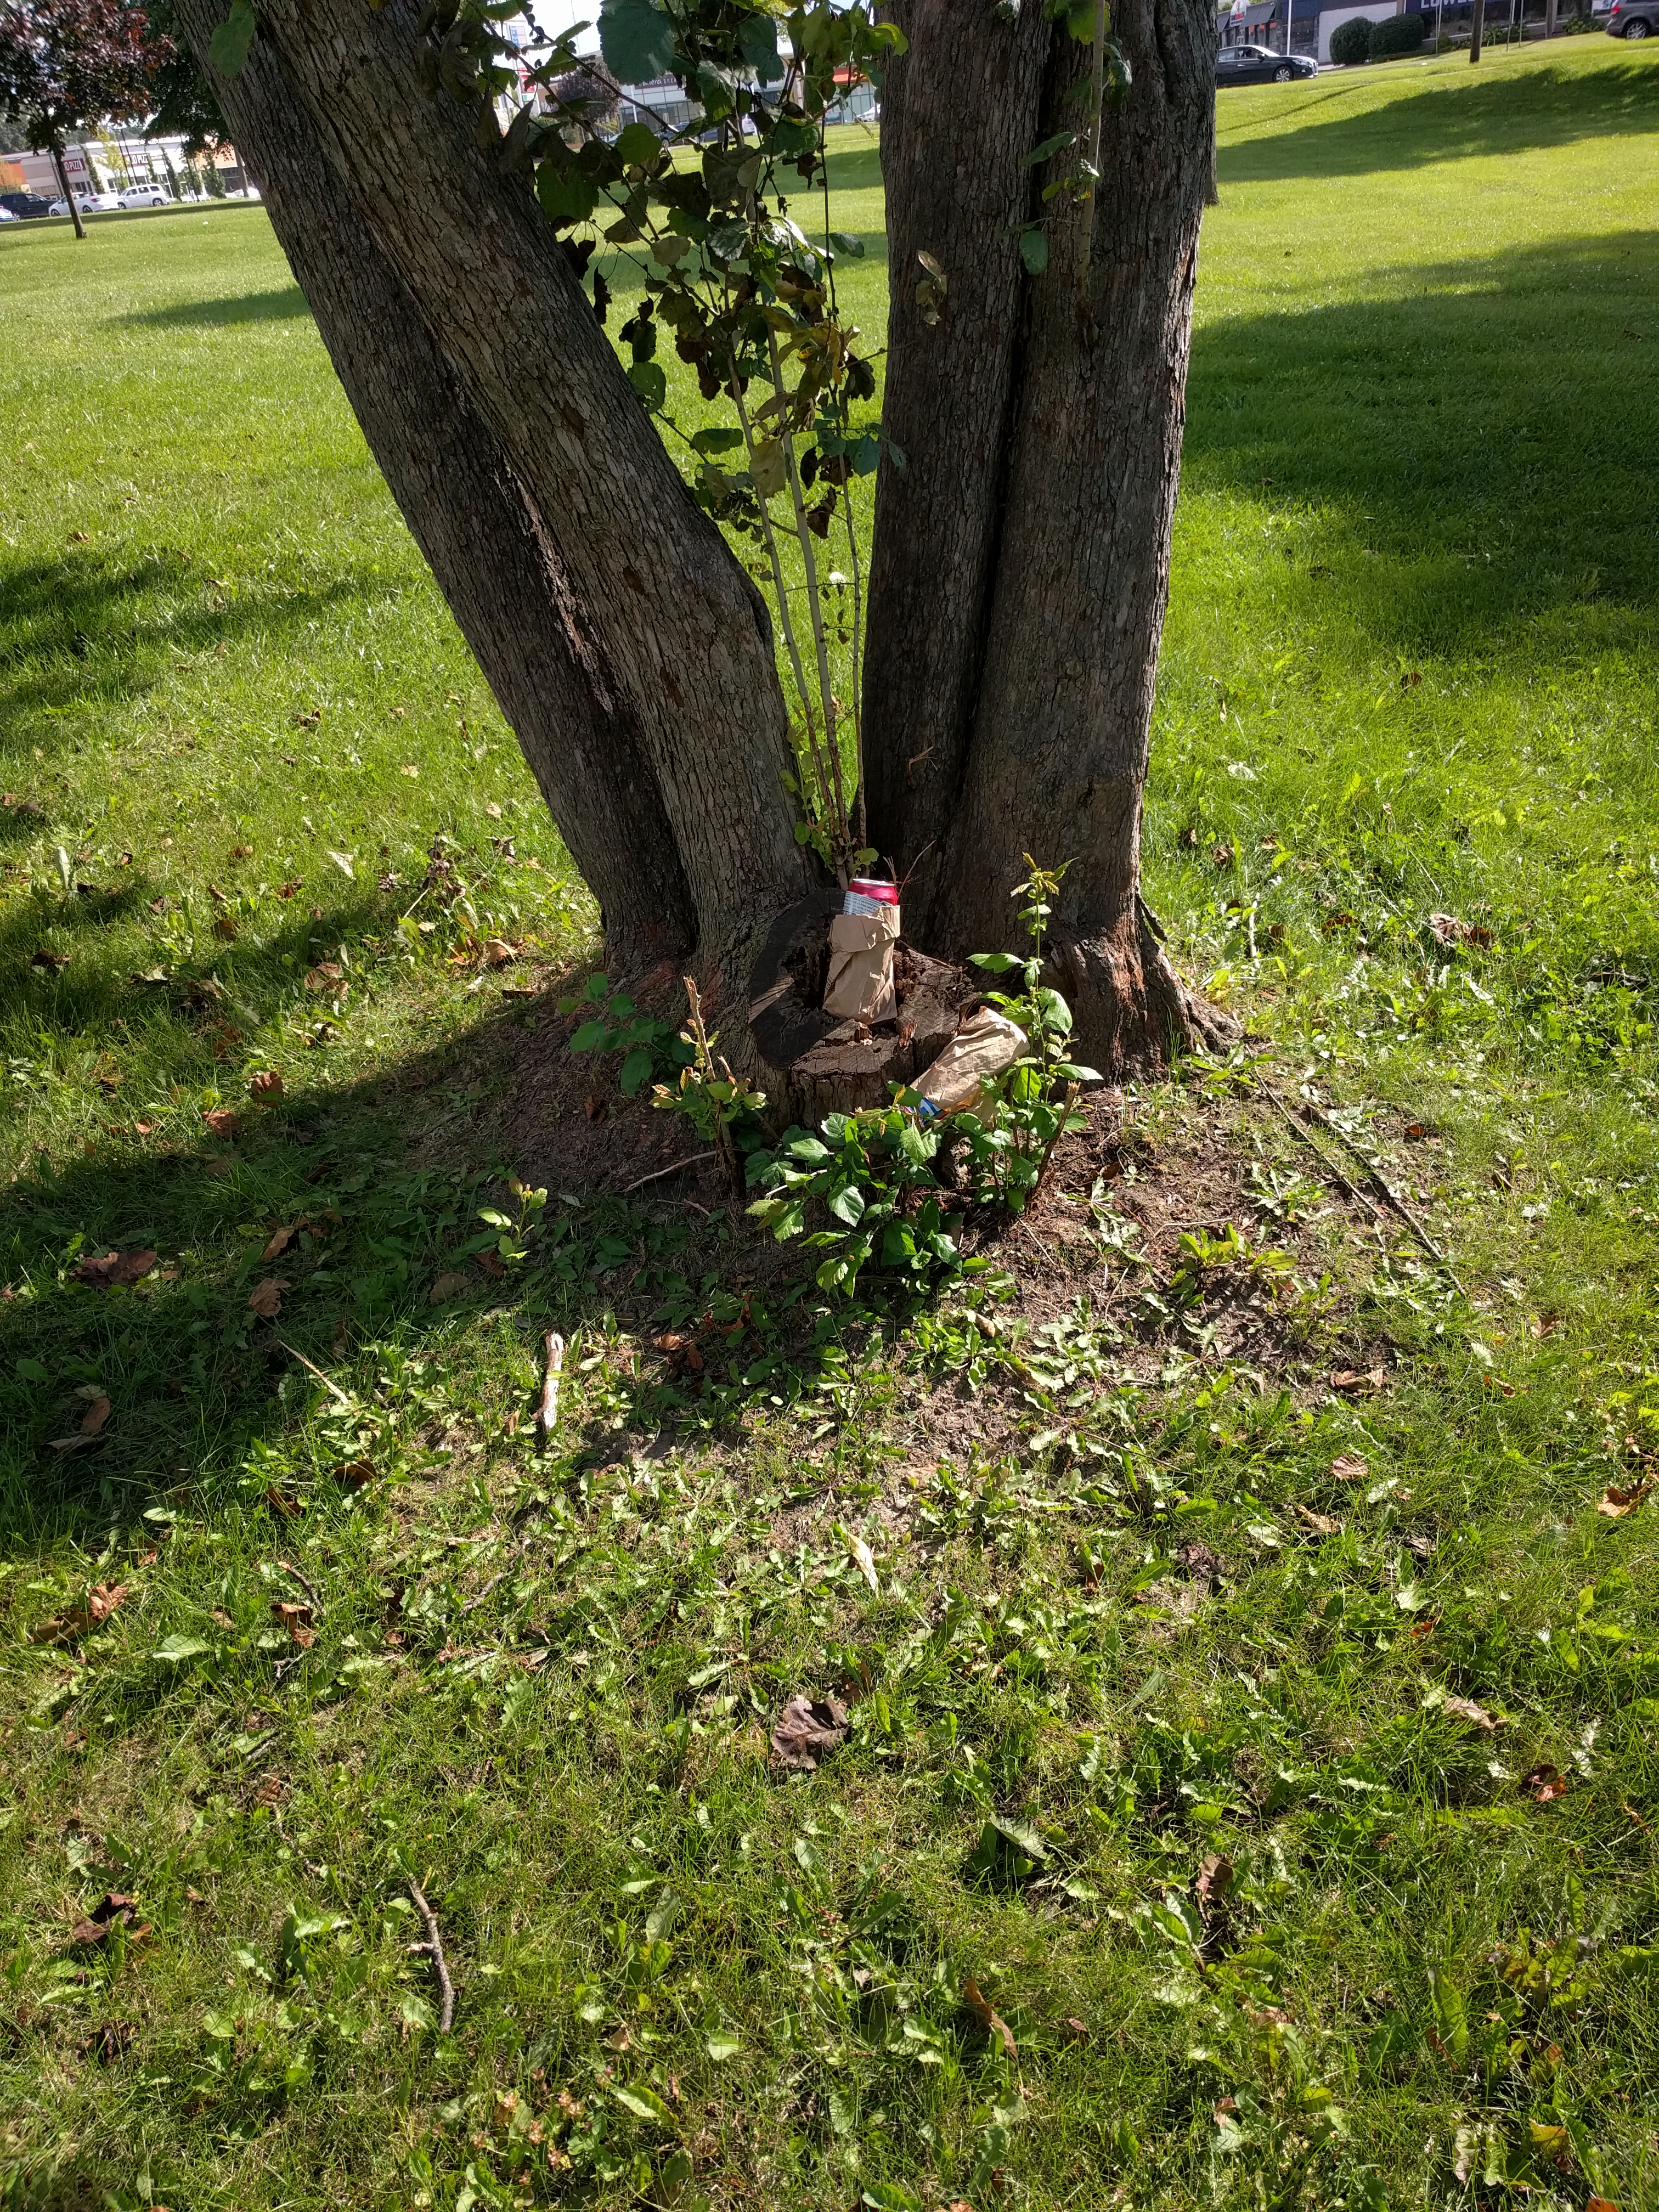 Beer can nestled within a tree